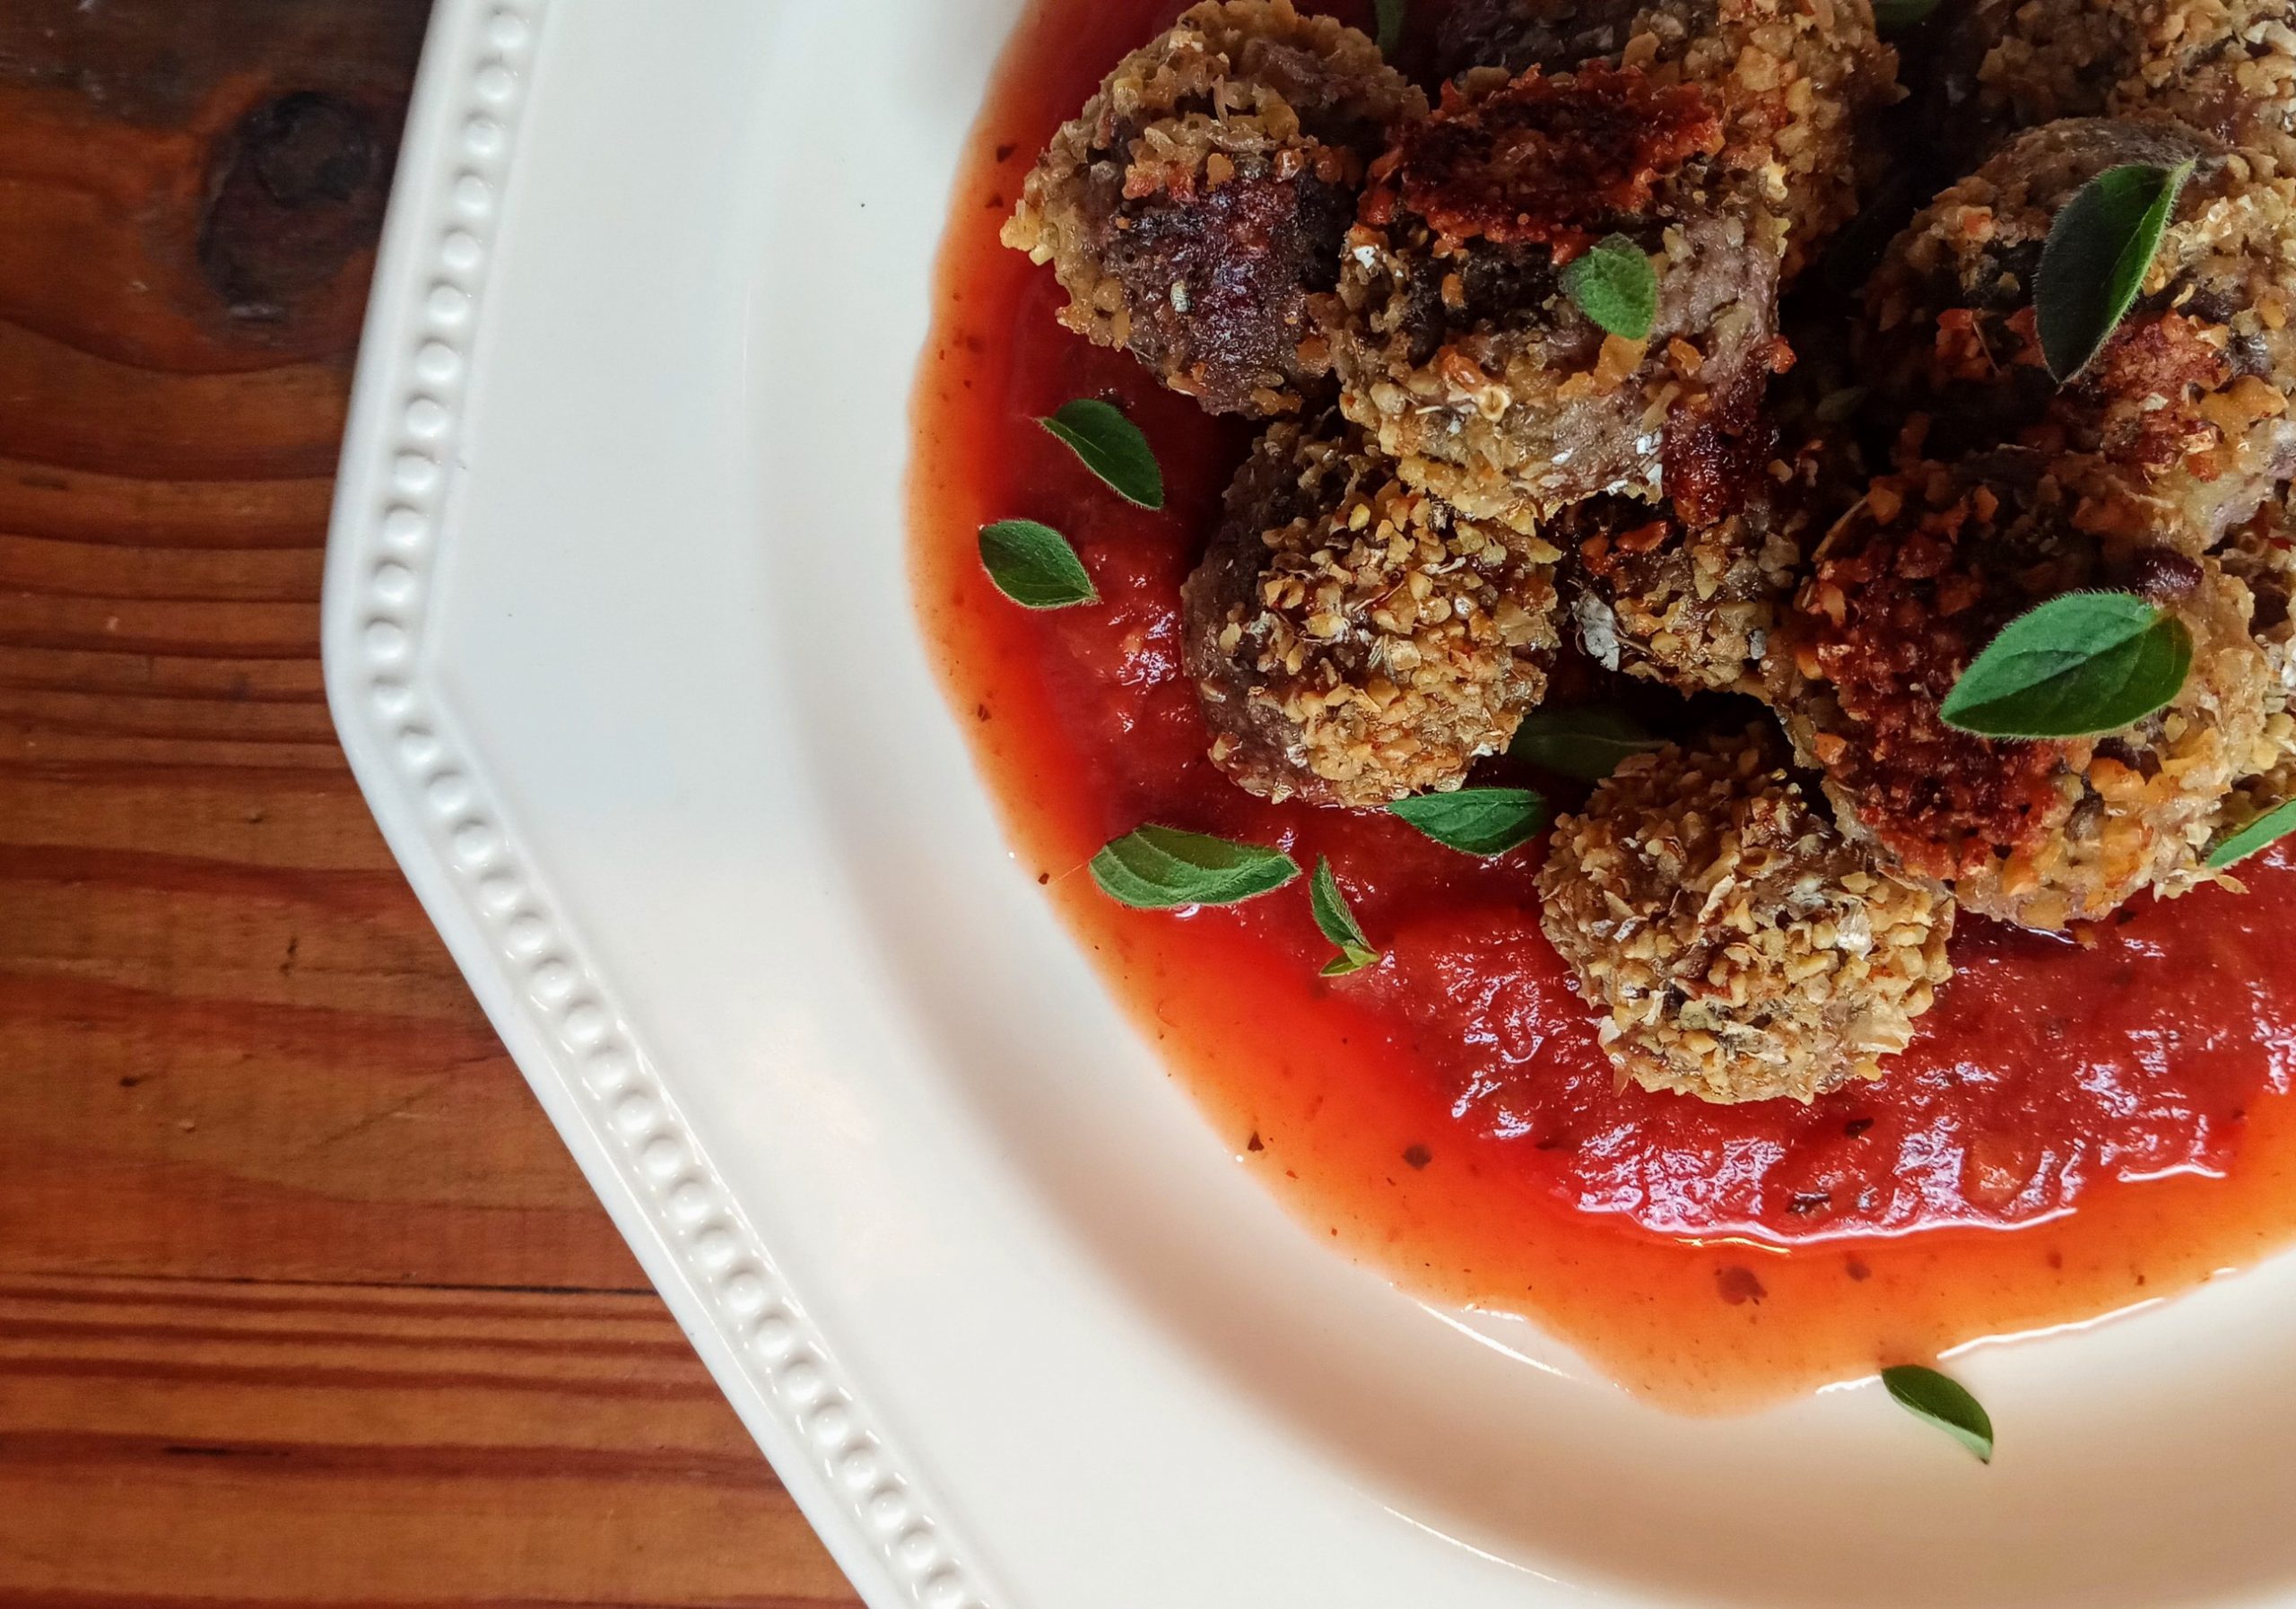 Here’s an easy way to make meatballs